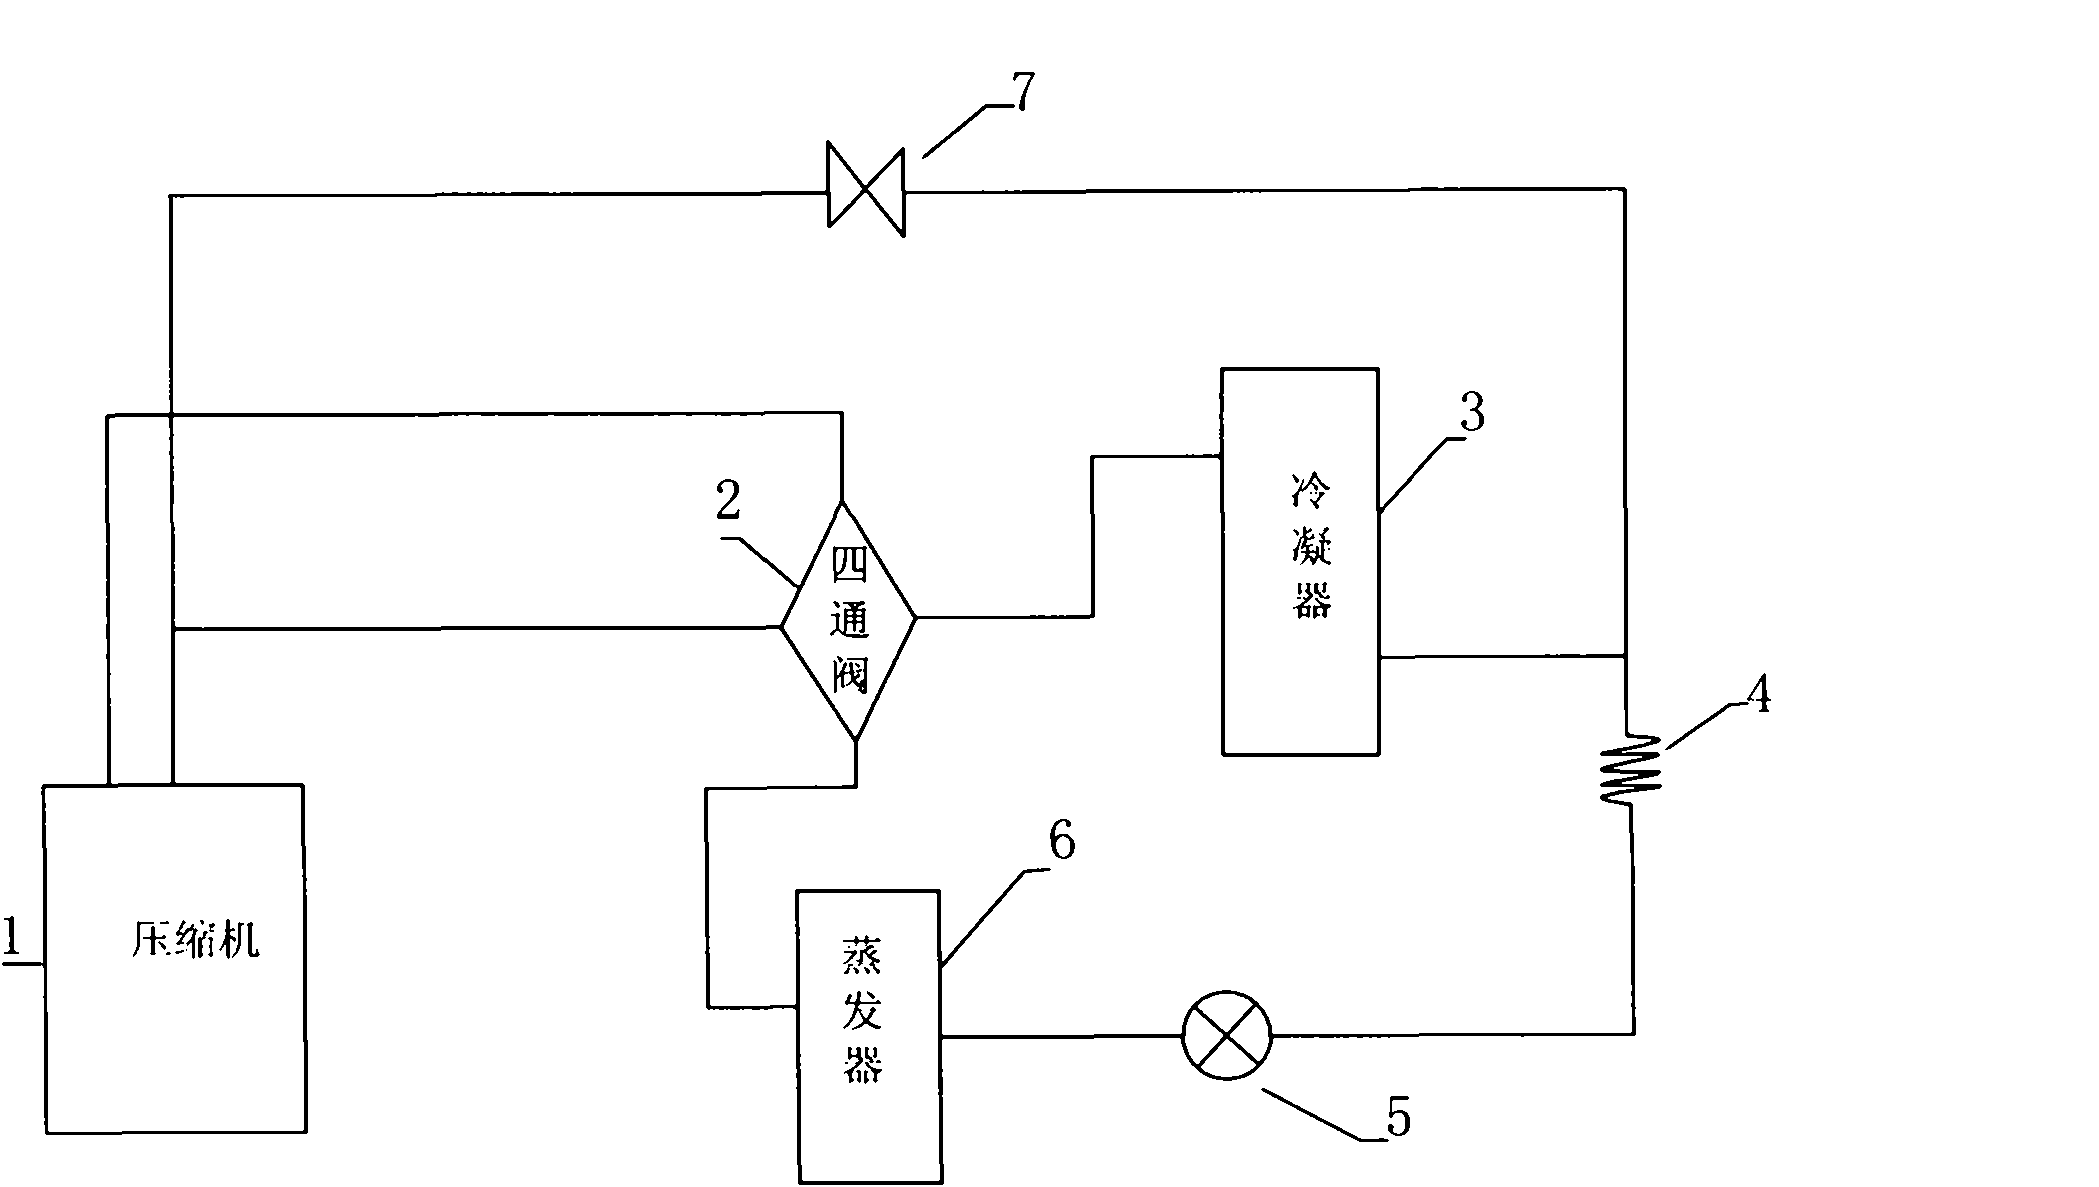 Hot-gas bypass defrosting system for variable-frequency air conditioner